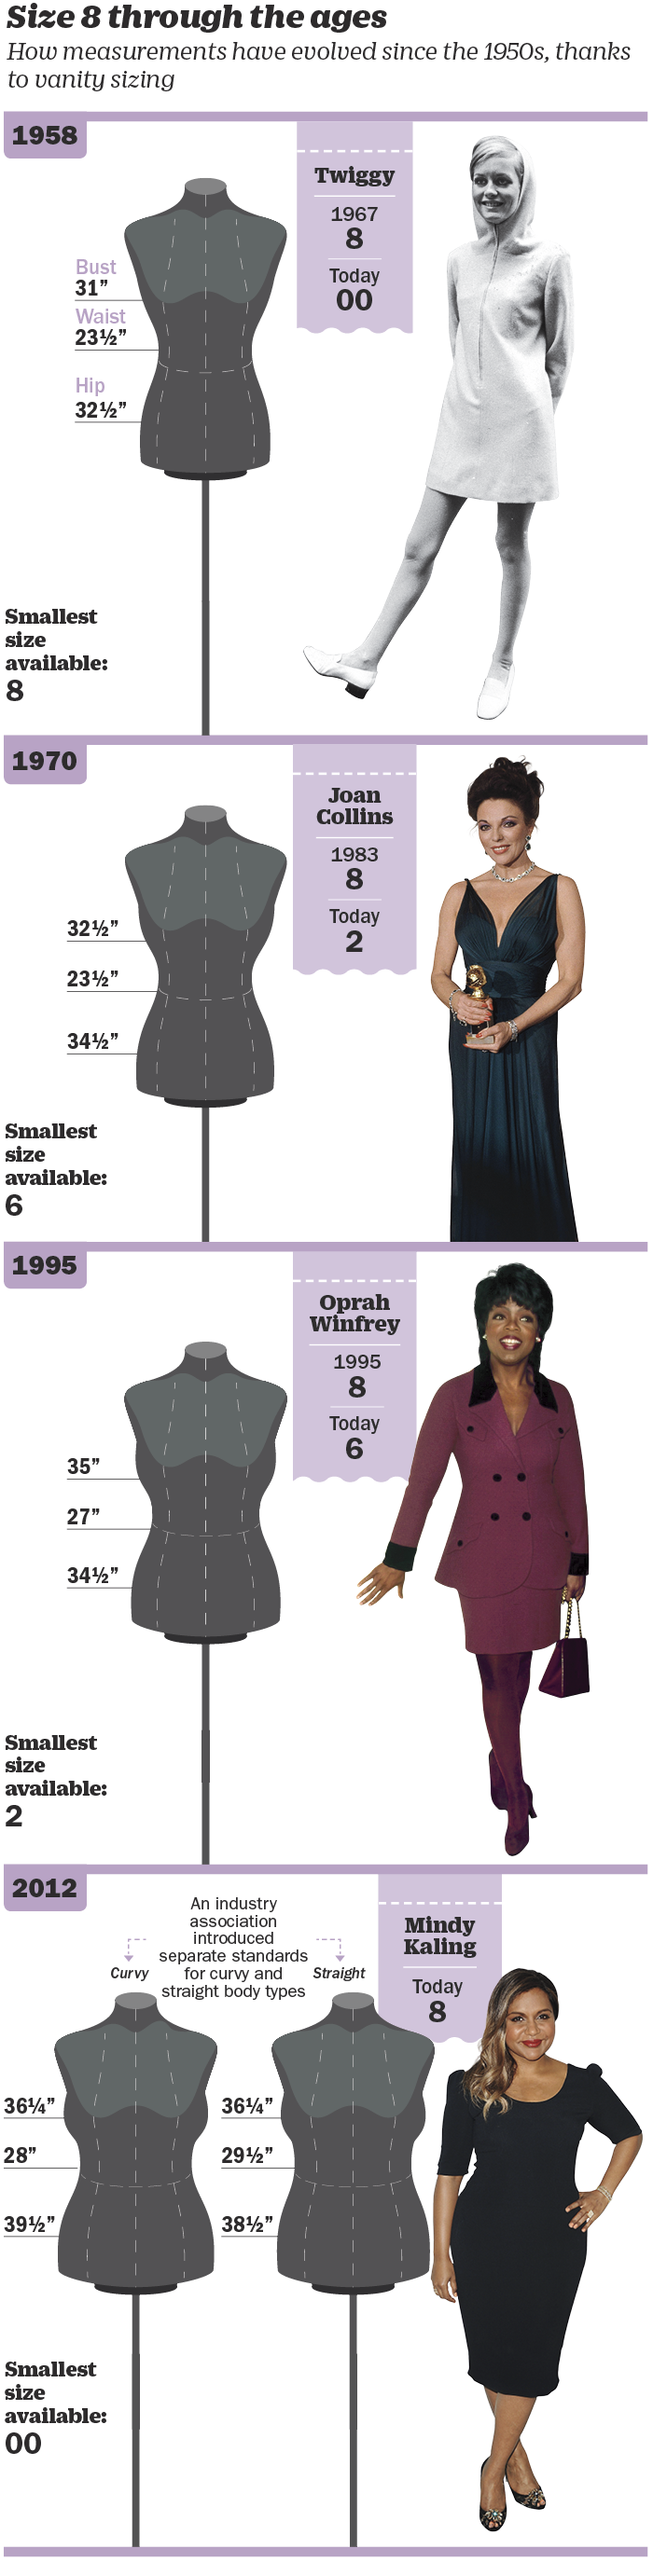 dress size examples